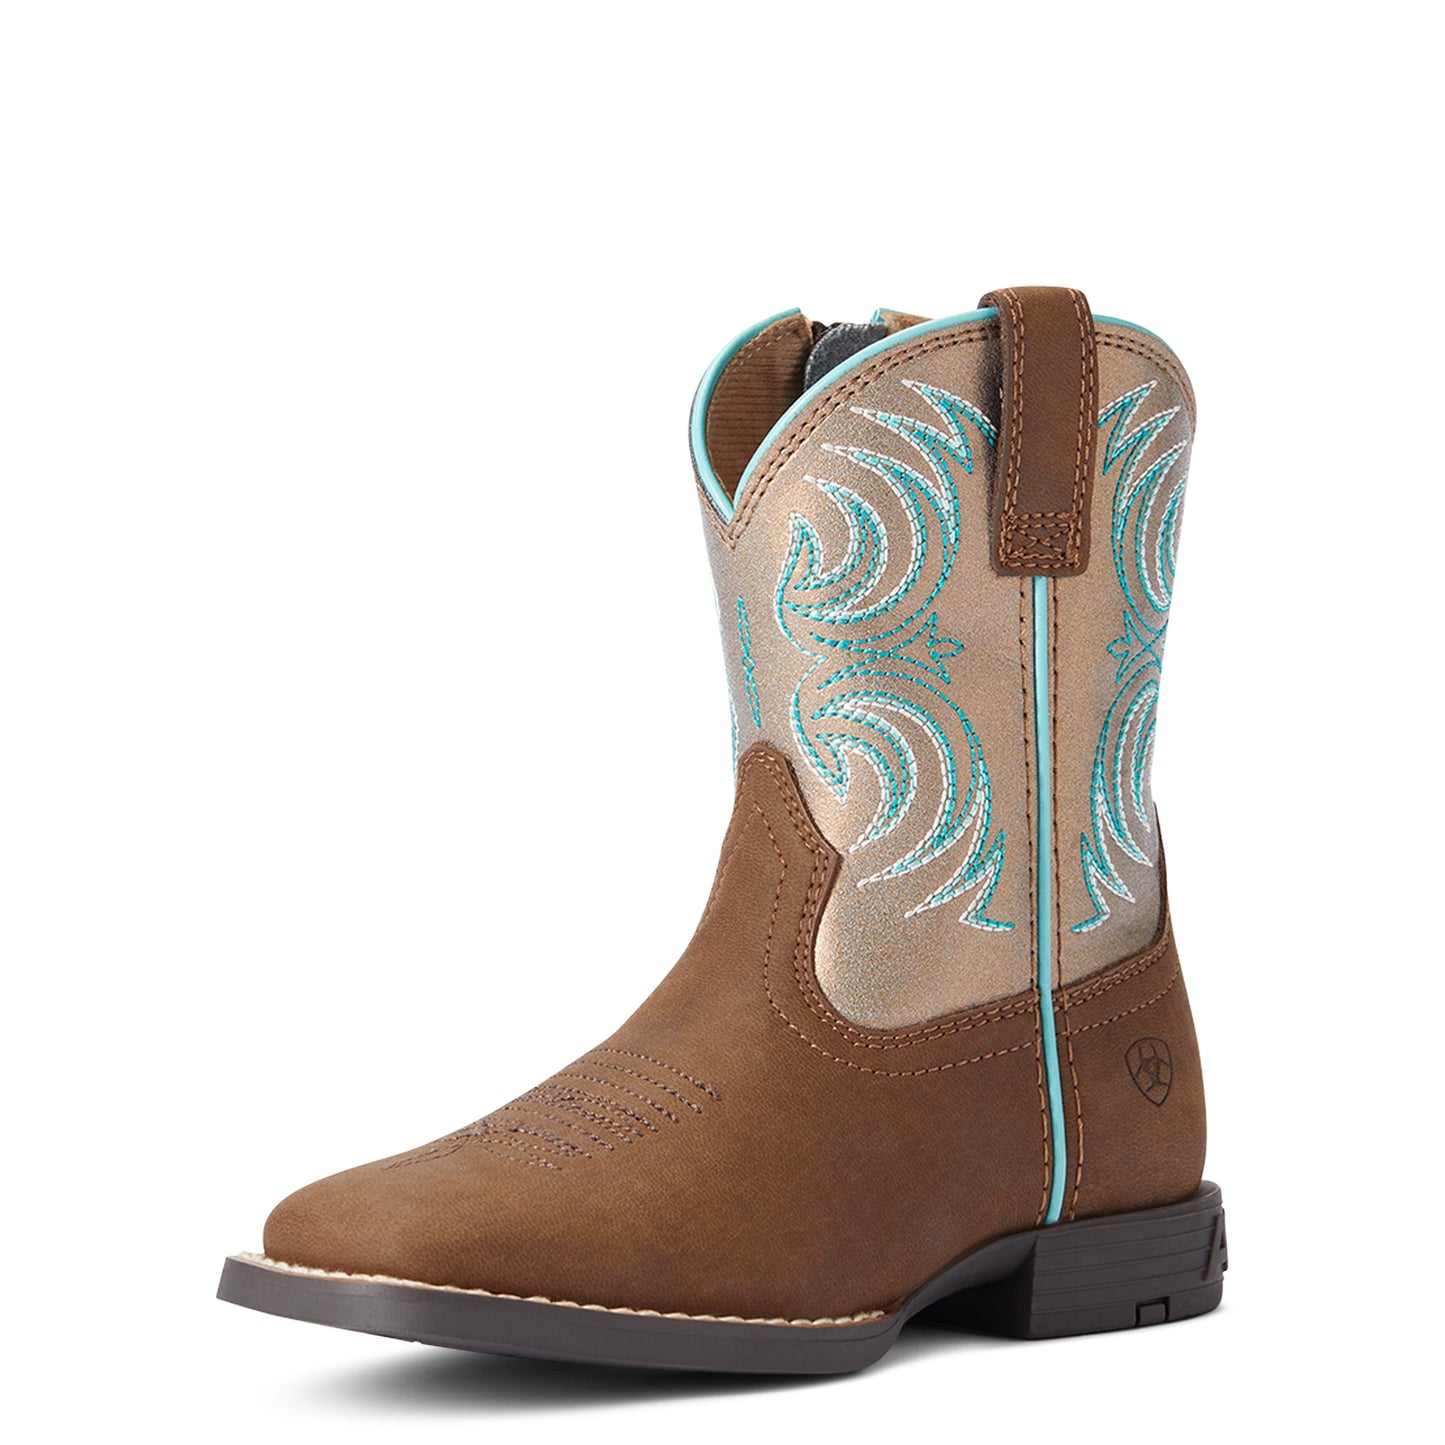 Ariat Storm Boot - Rich Clay